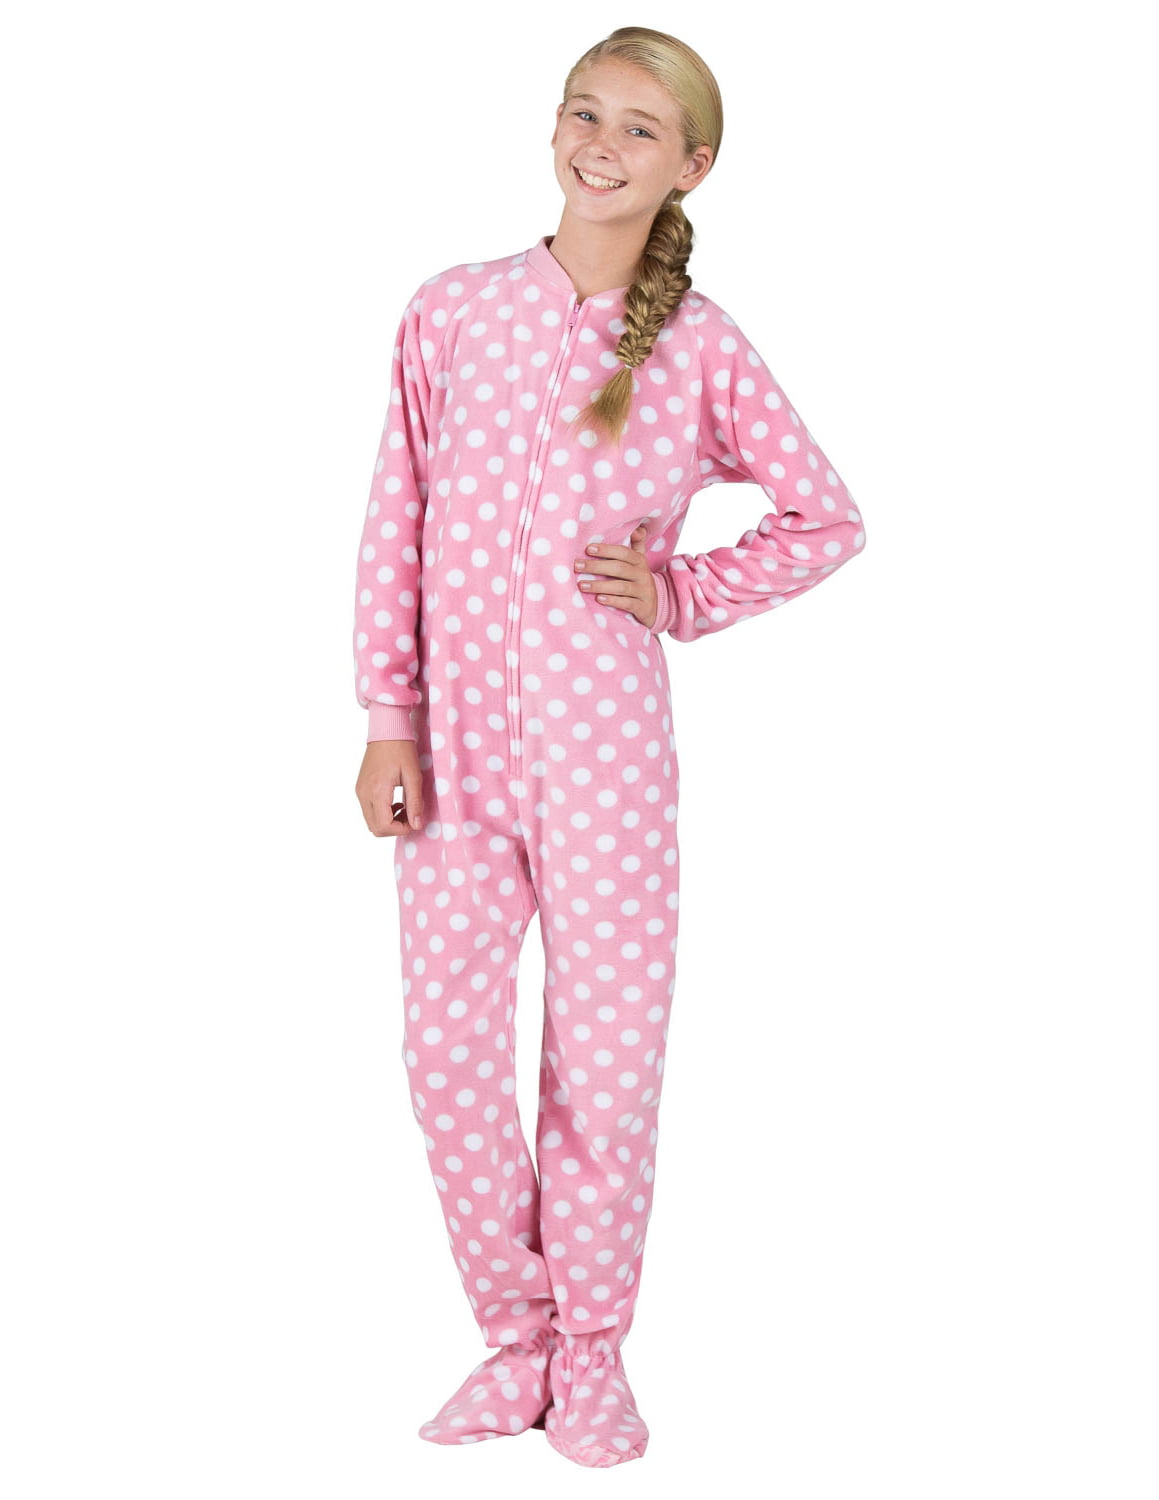 Justice for Girls Otterly Amazing Footed One Piece Pajamas.